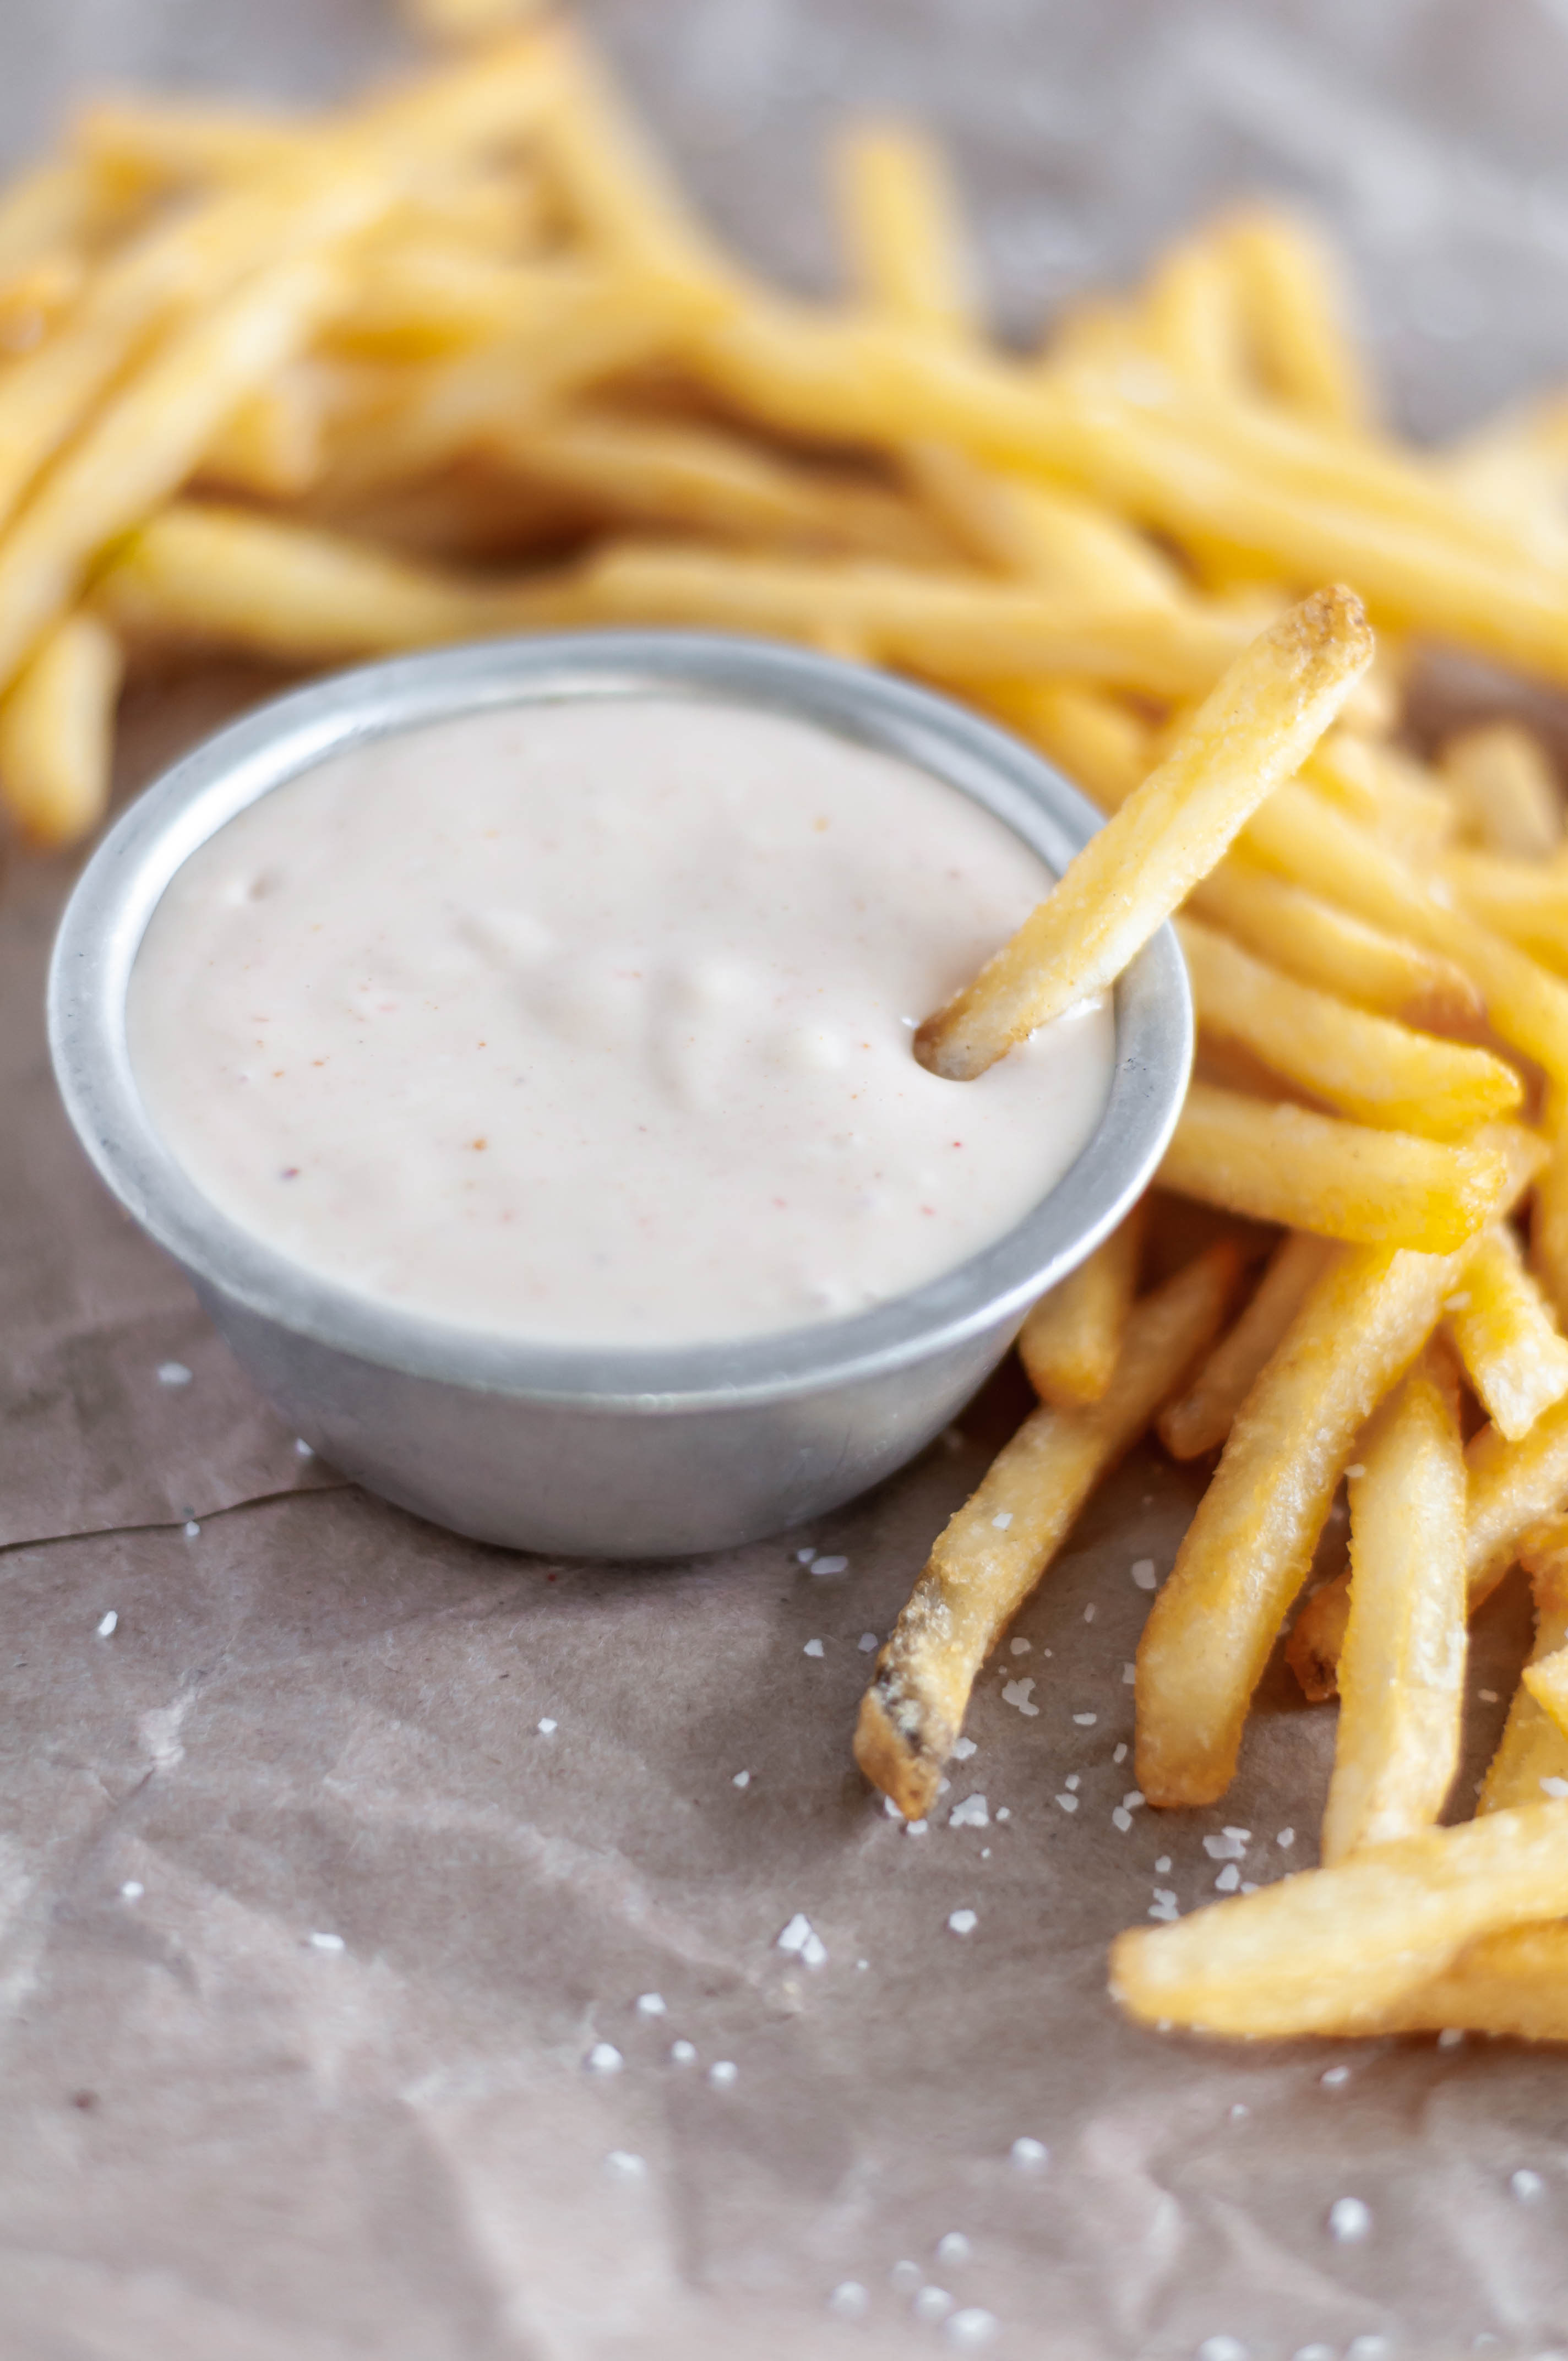 Spicy Fry Sauce is perfect for dipping those crispy french fries and onion rings. A classic fry sauce with a few spicy additions.